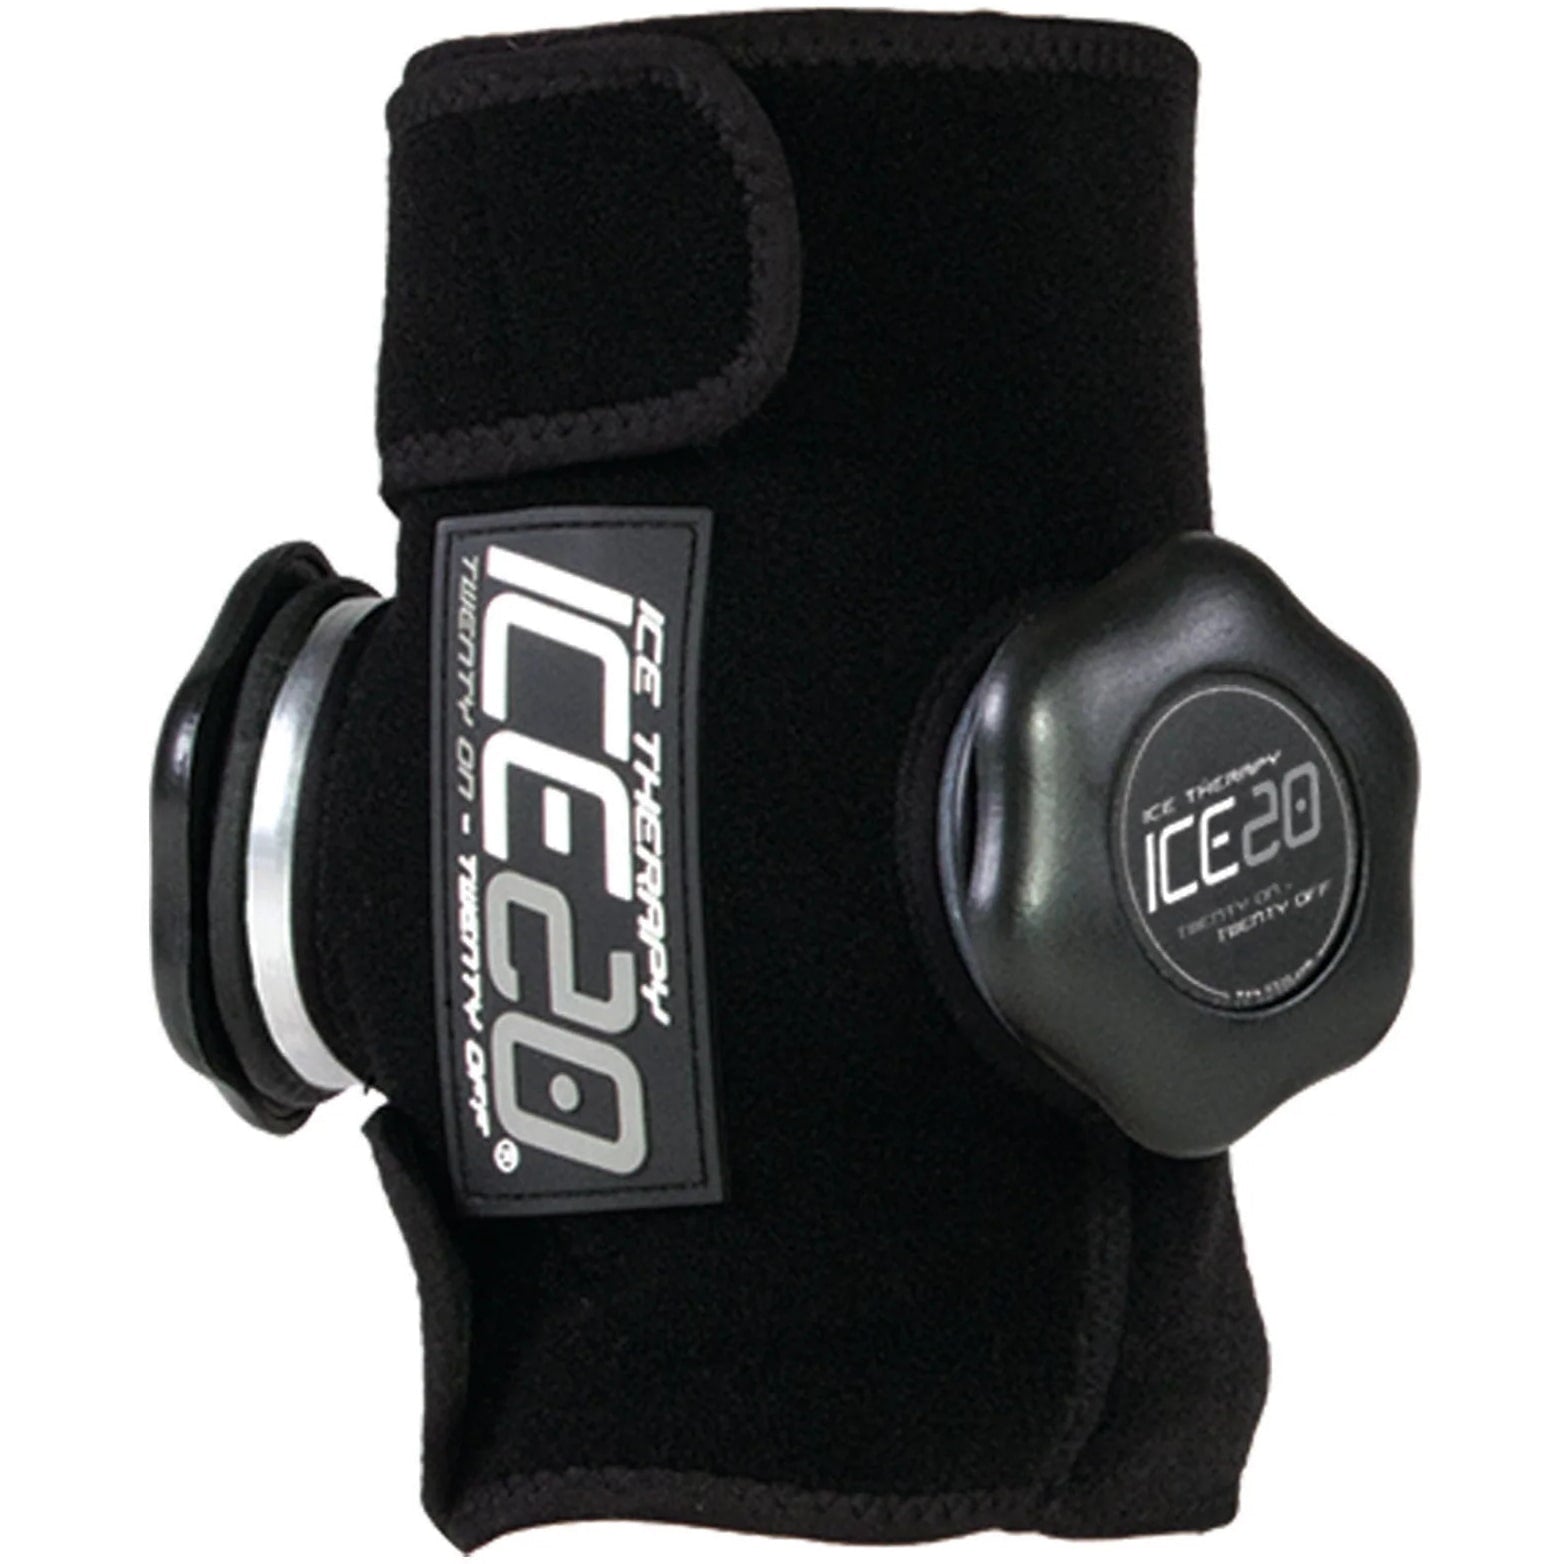 ICE20 Compression Wrap - Double Ankle